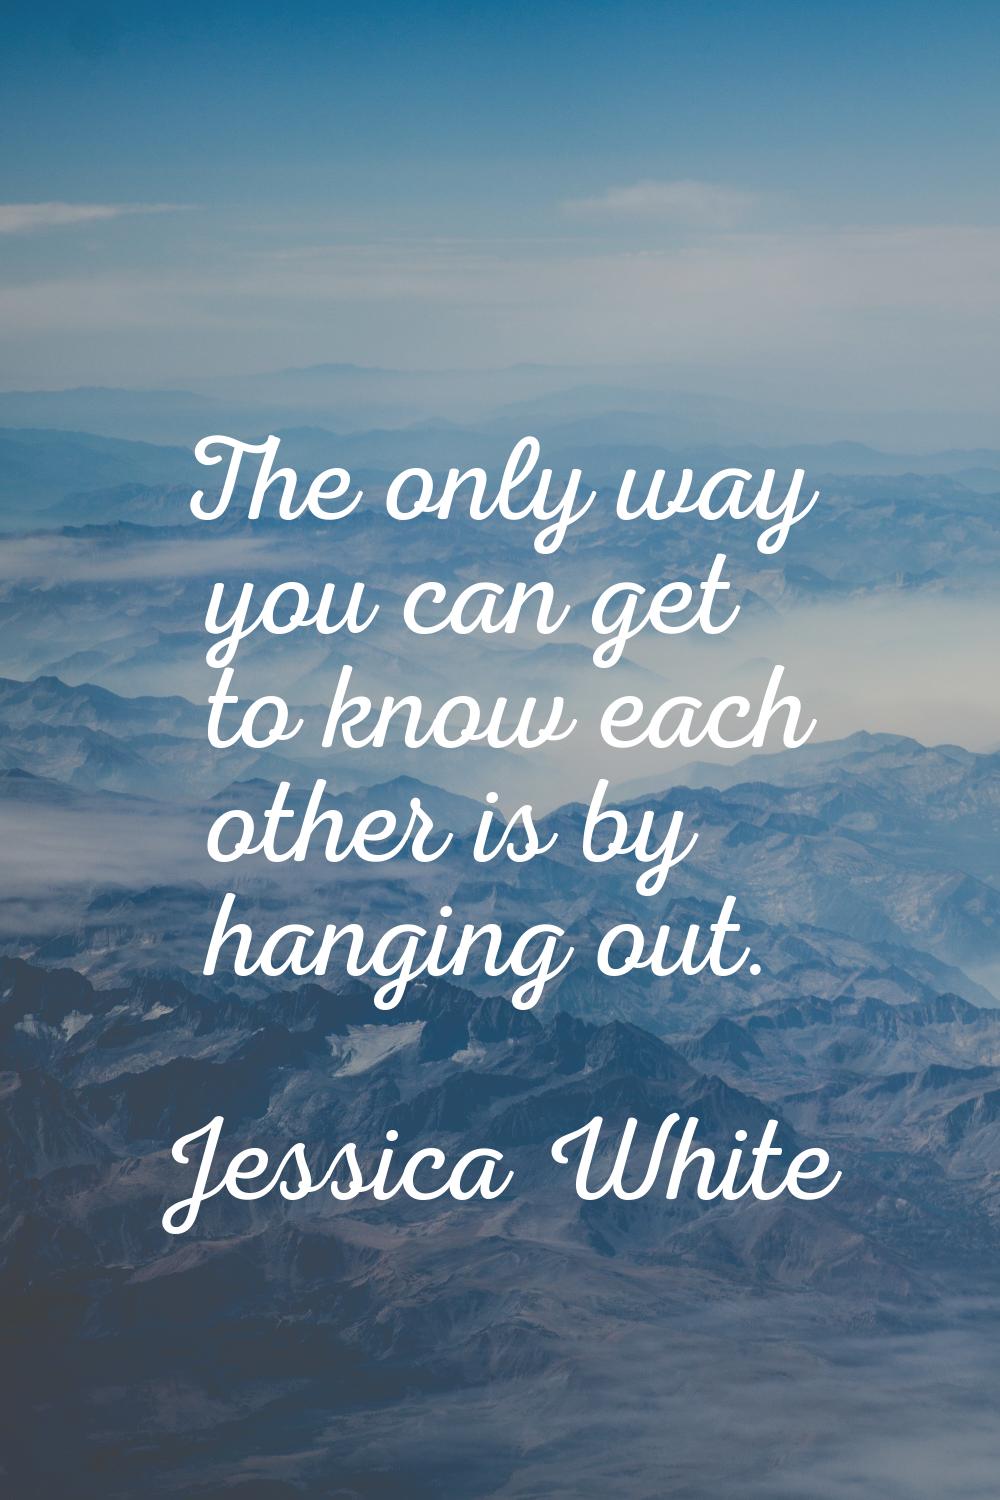 The only way you can get to know each other is by hanging out.